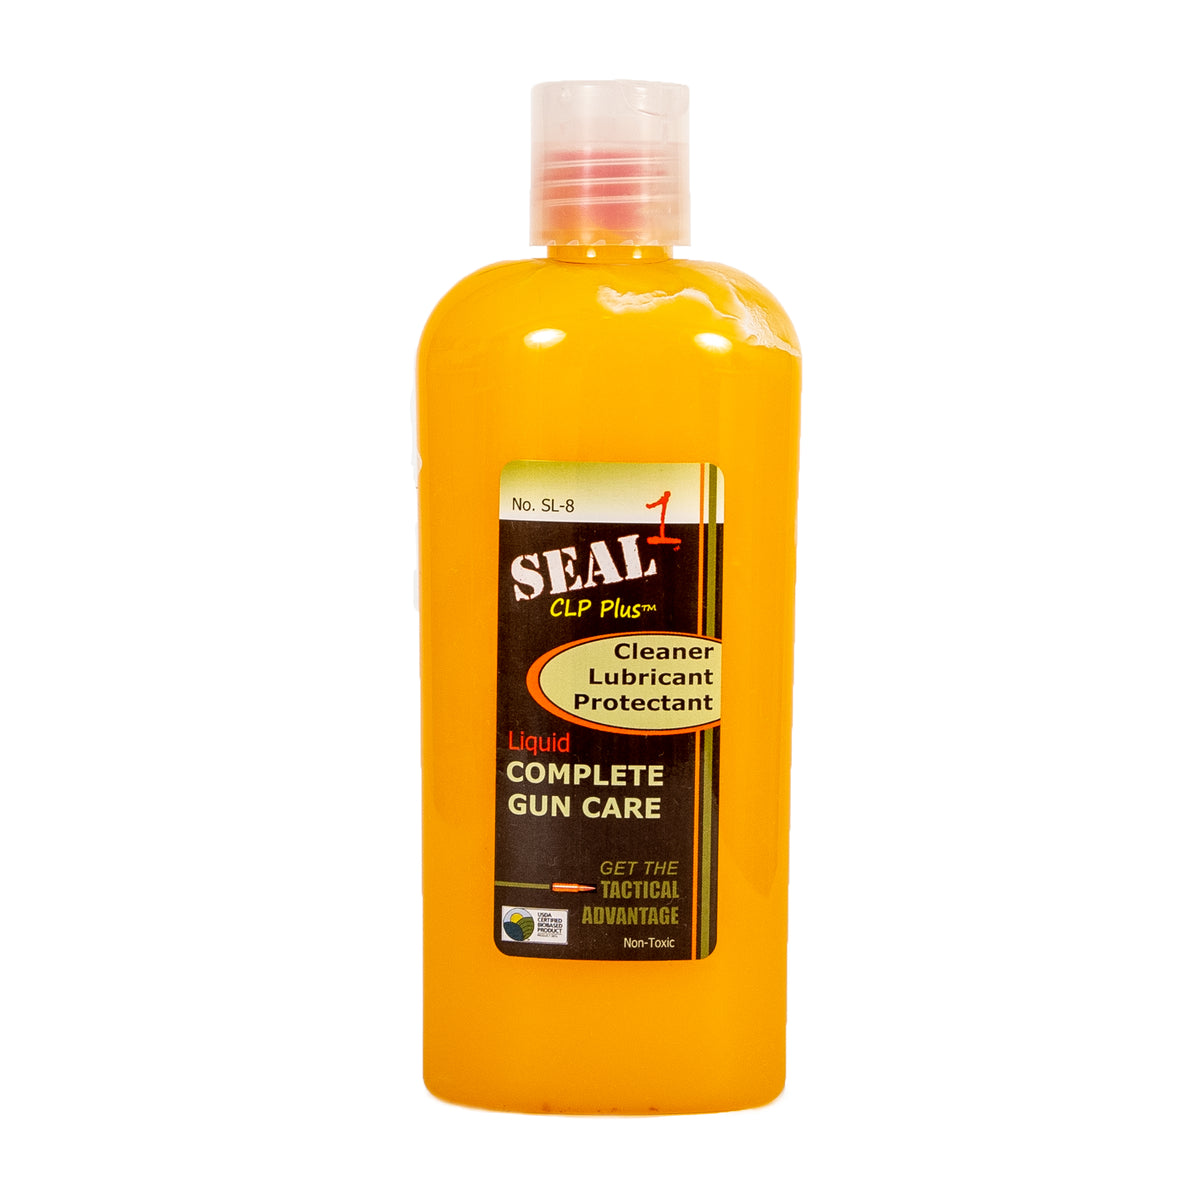 SEAL 1 CLP PLUS Complete Gun Care Products Made In USA